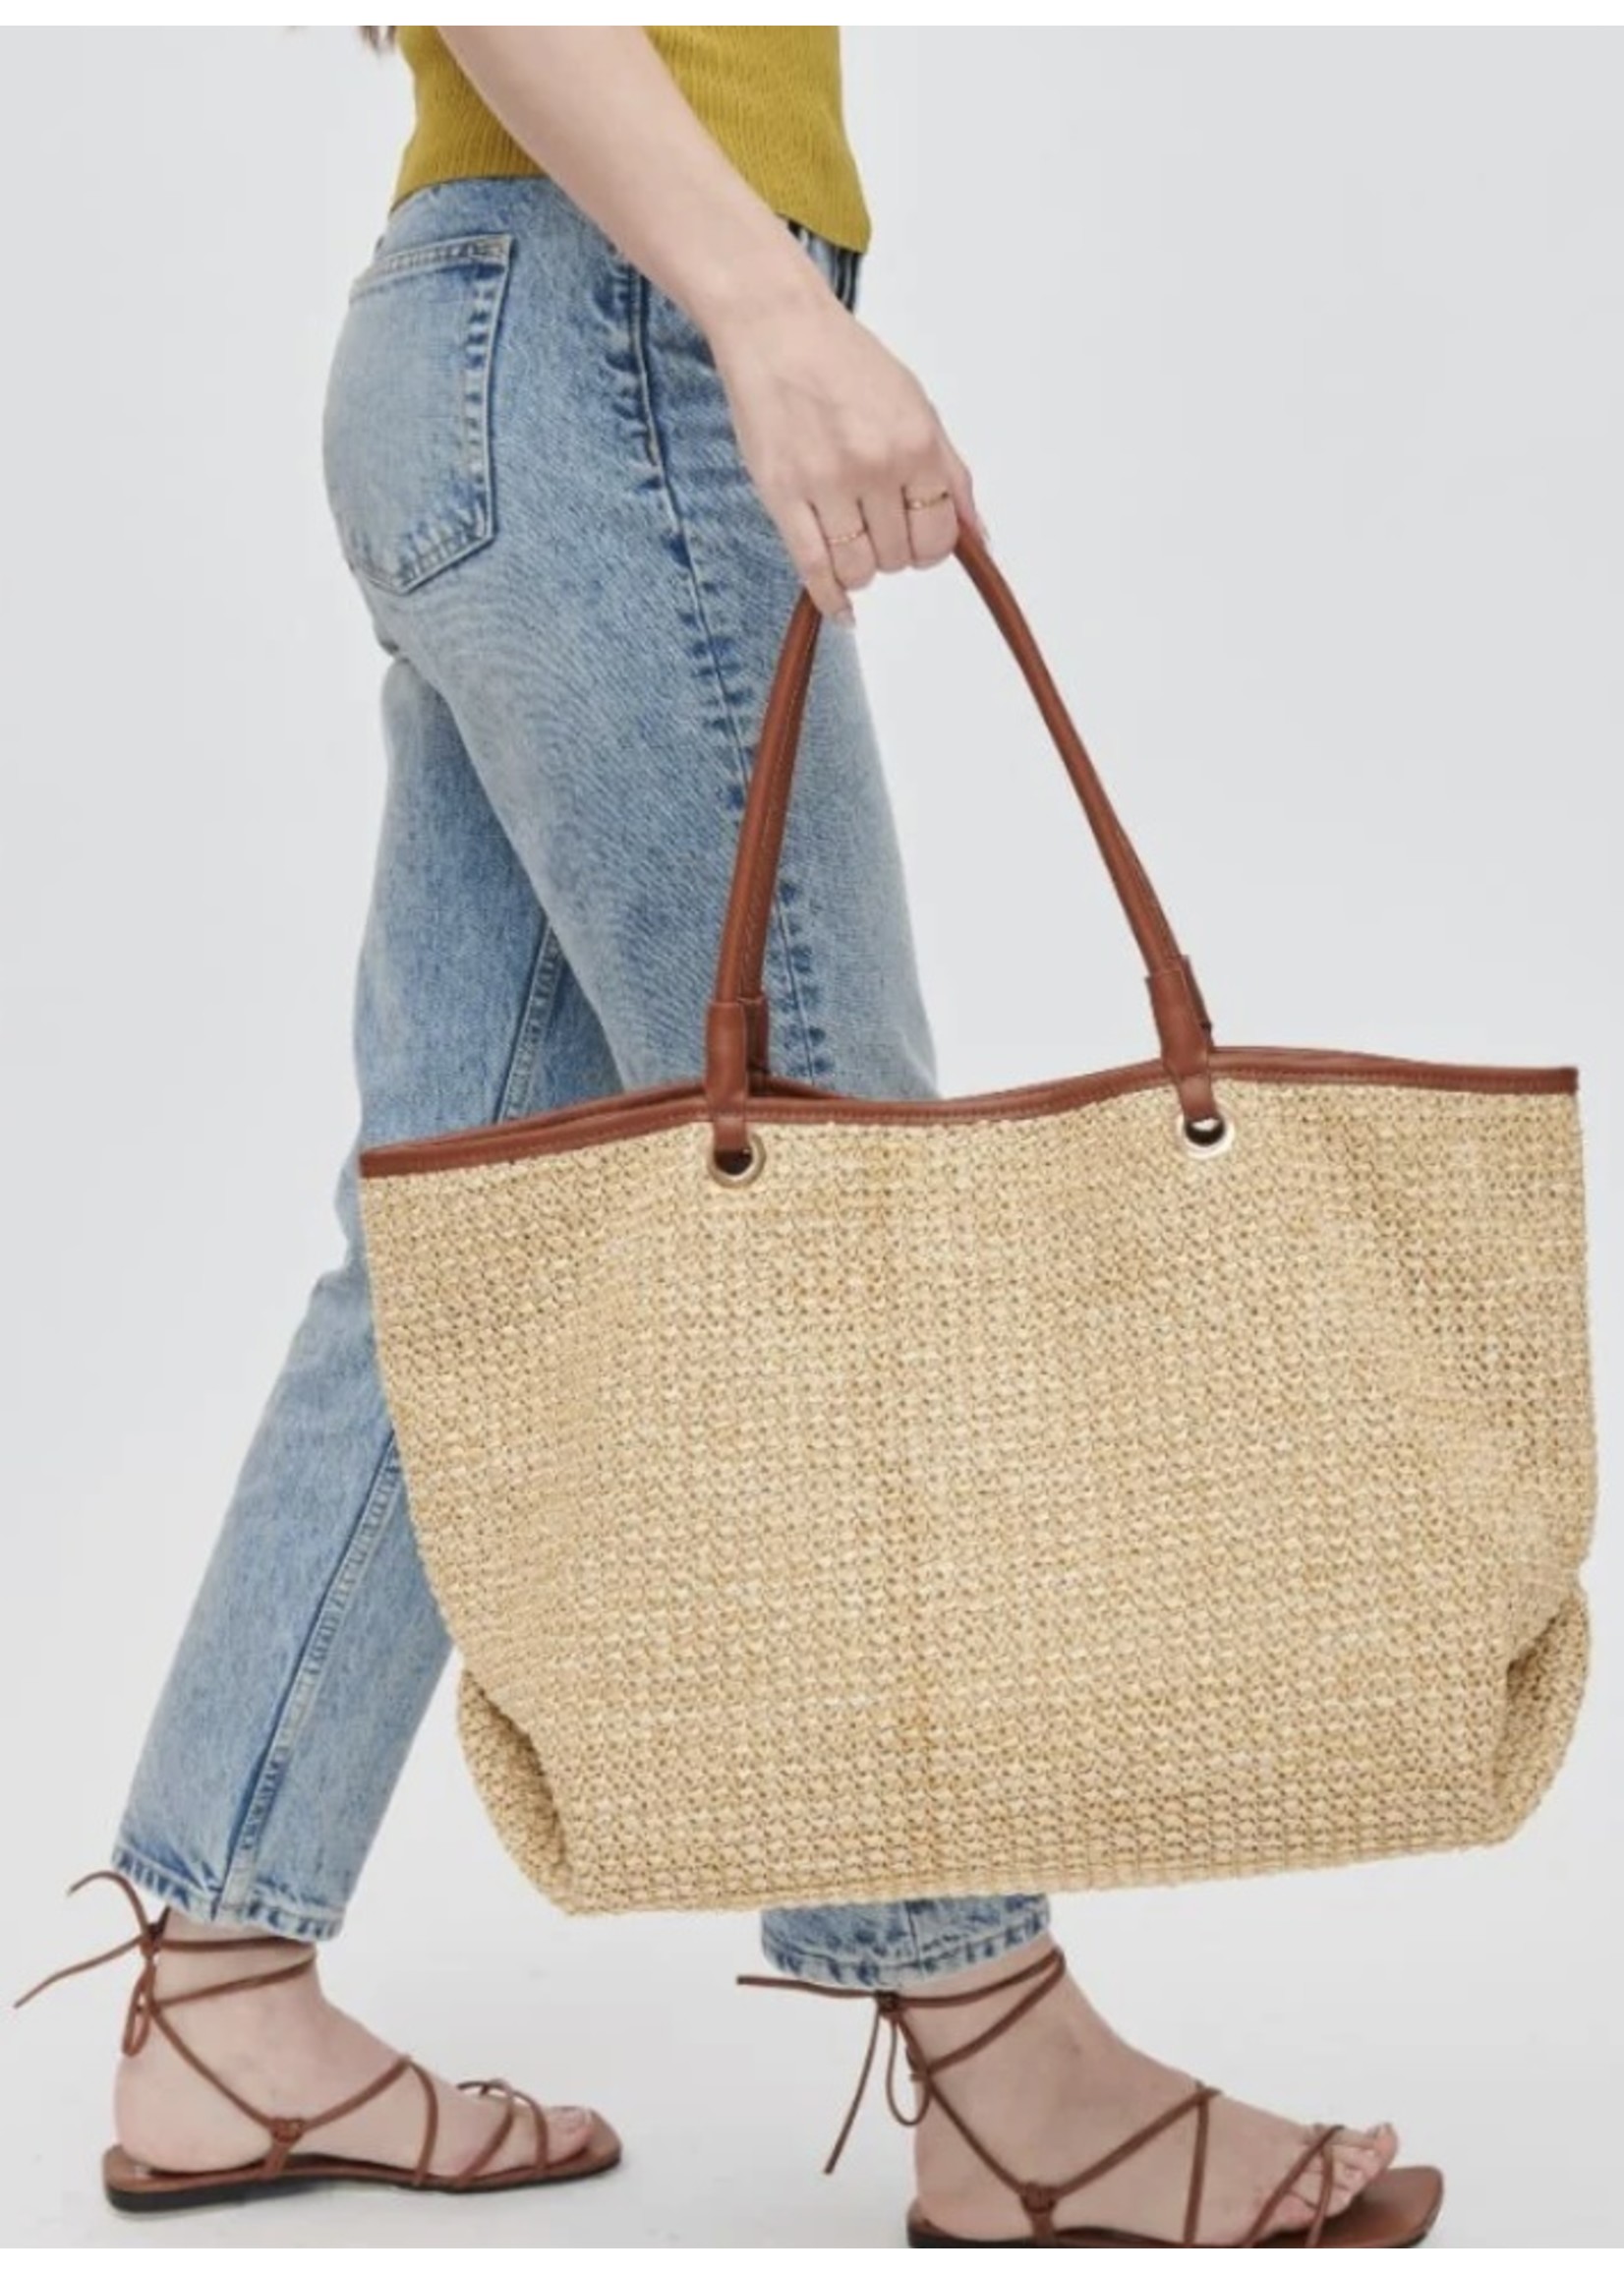 Kaitlin Tote